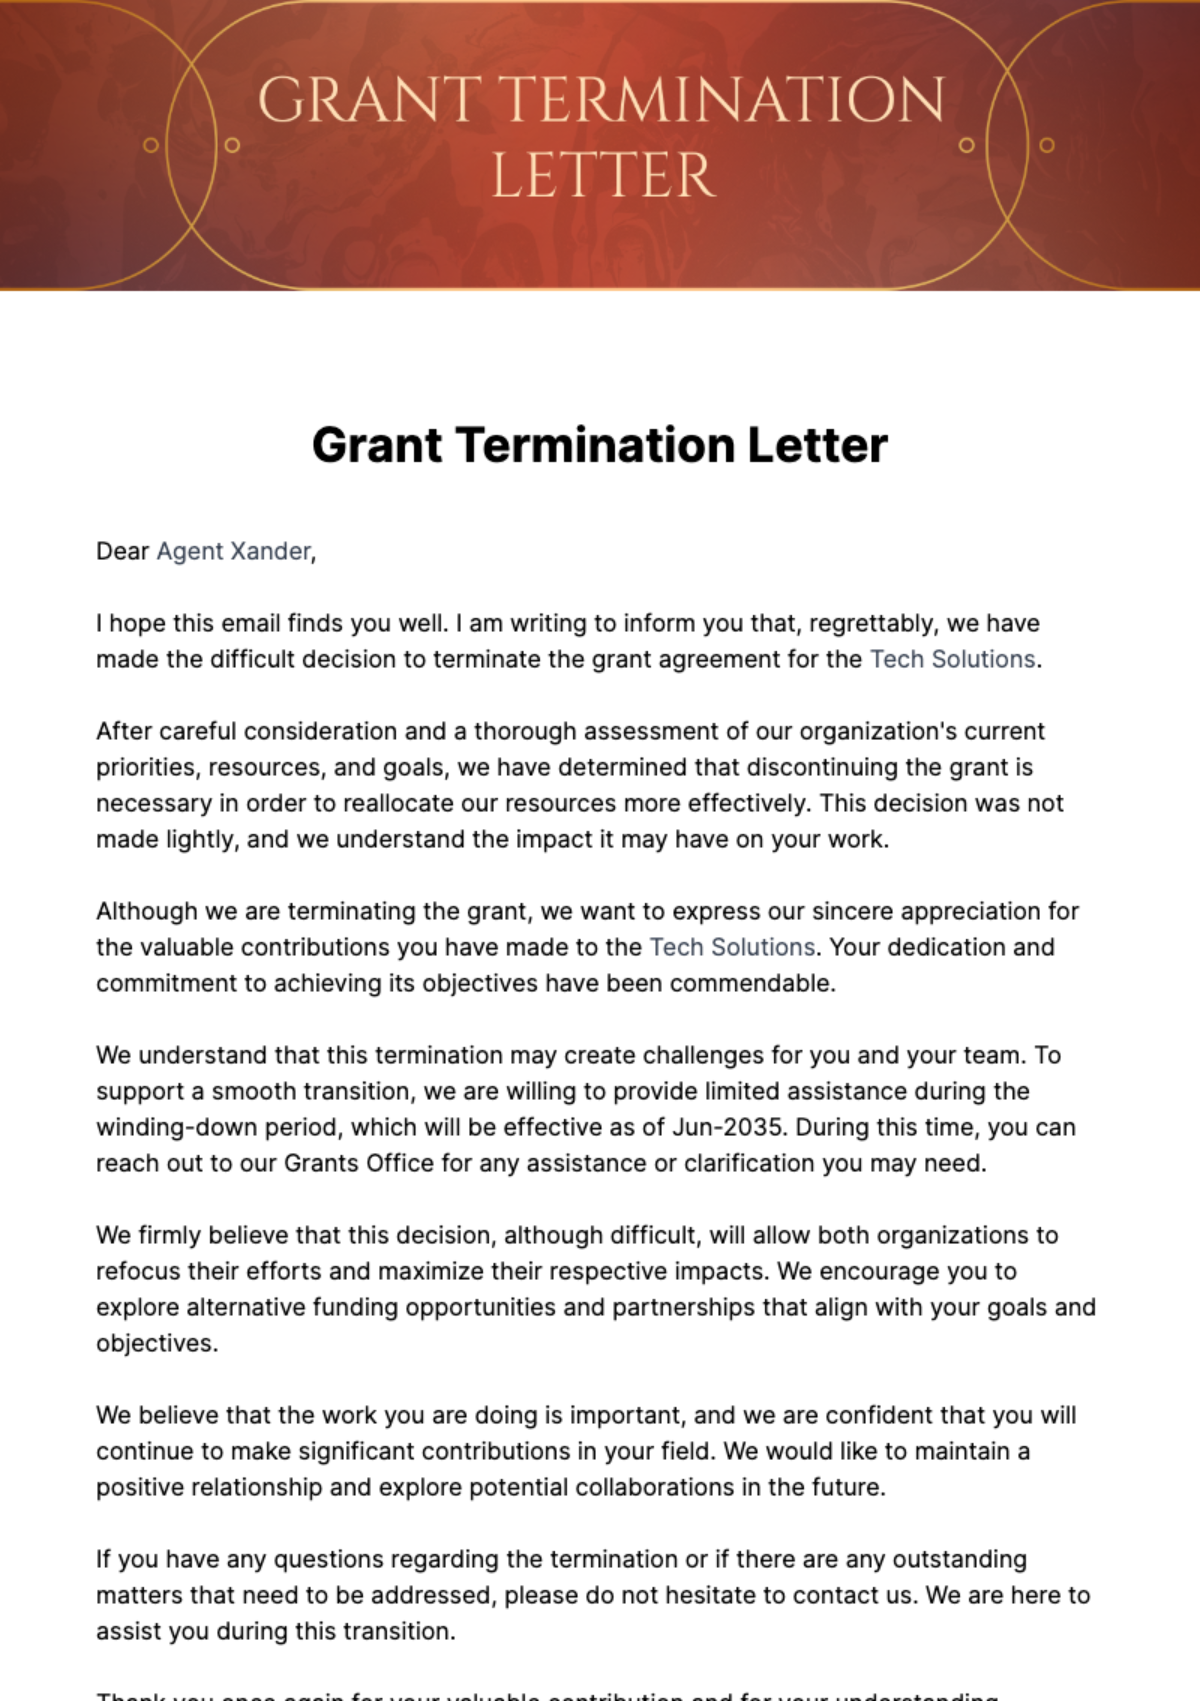 Free Grant Termination Letter Template